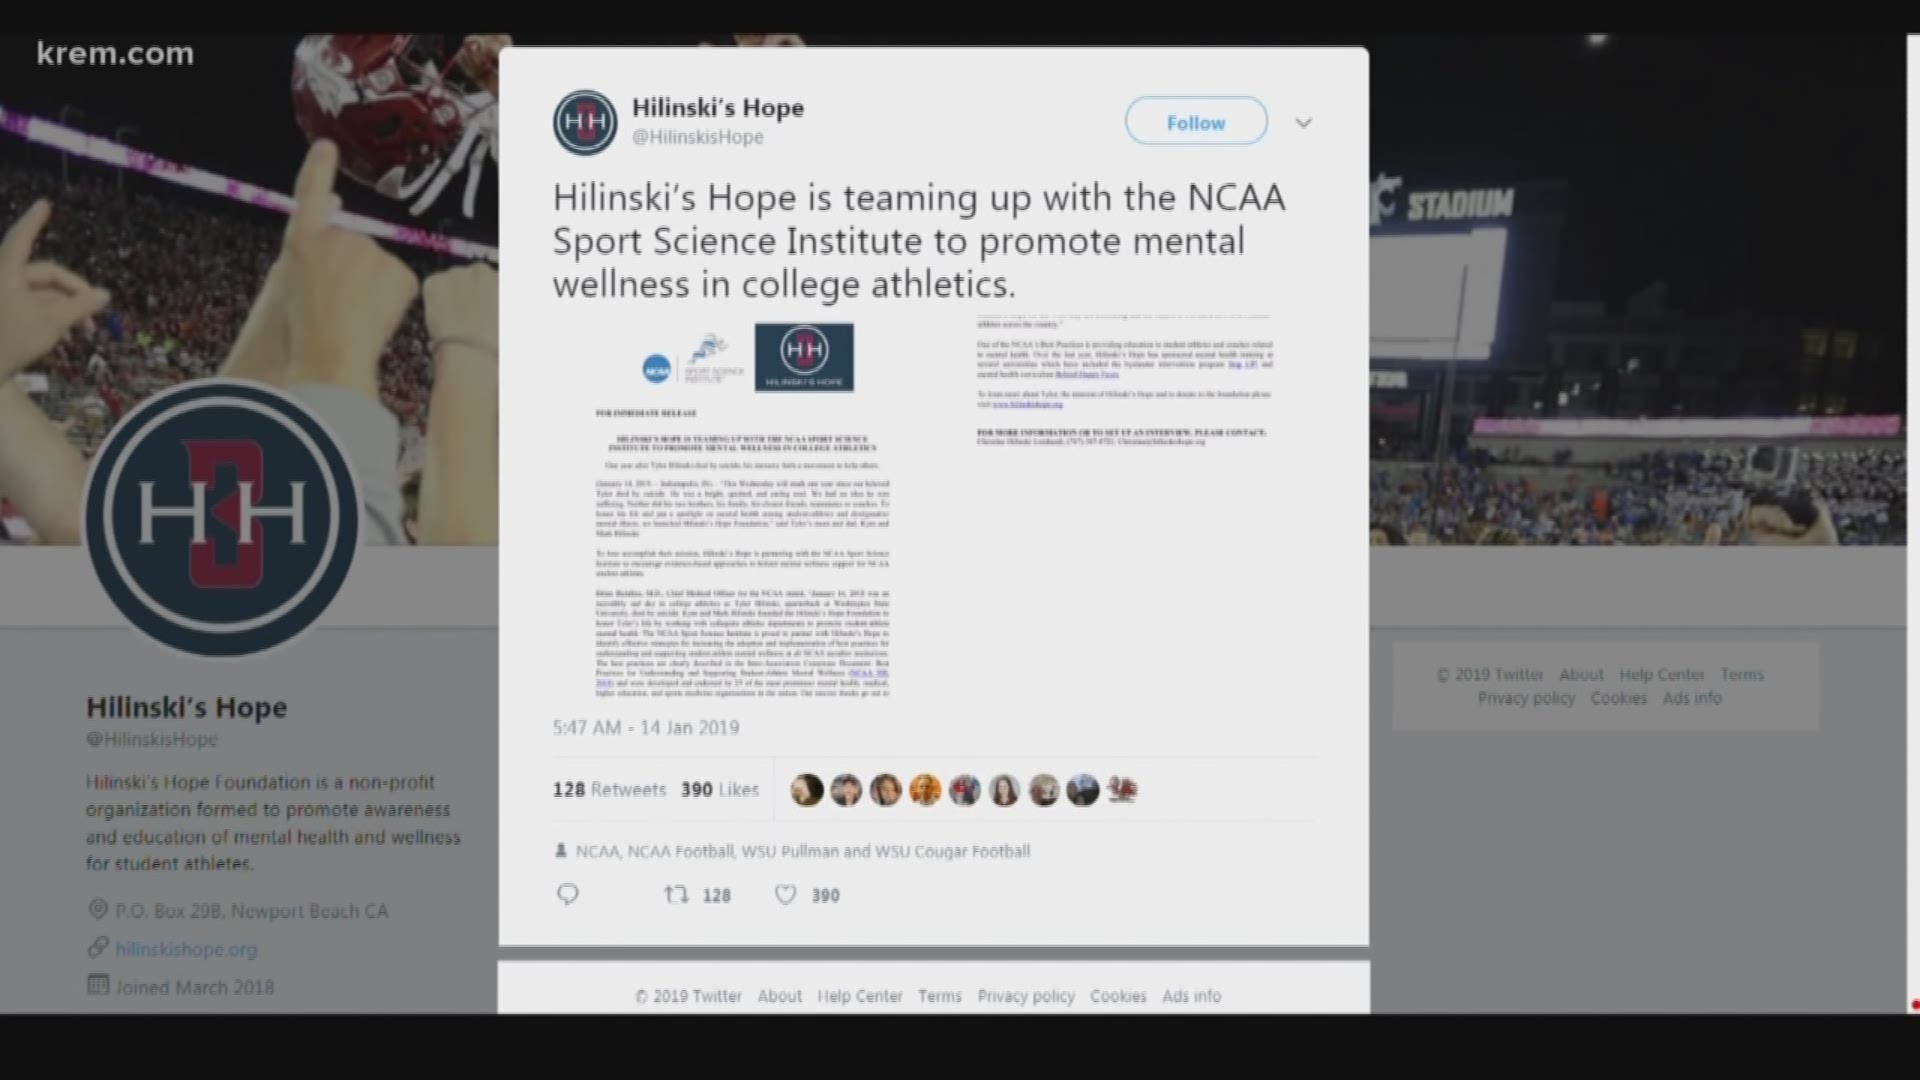 Hilinski’s Hope, a foundation created to bring mental health resources to student-athletes, is teaming up with the NCAA Sport Science Institute to promote mental wellness support for college athletes, according to a Hilinski’s Hope Facebook post.